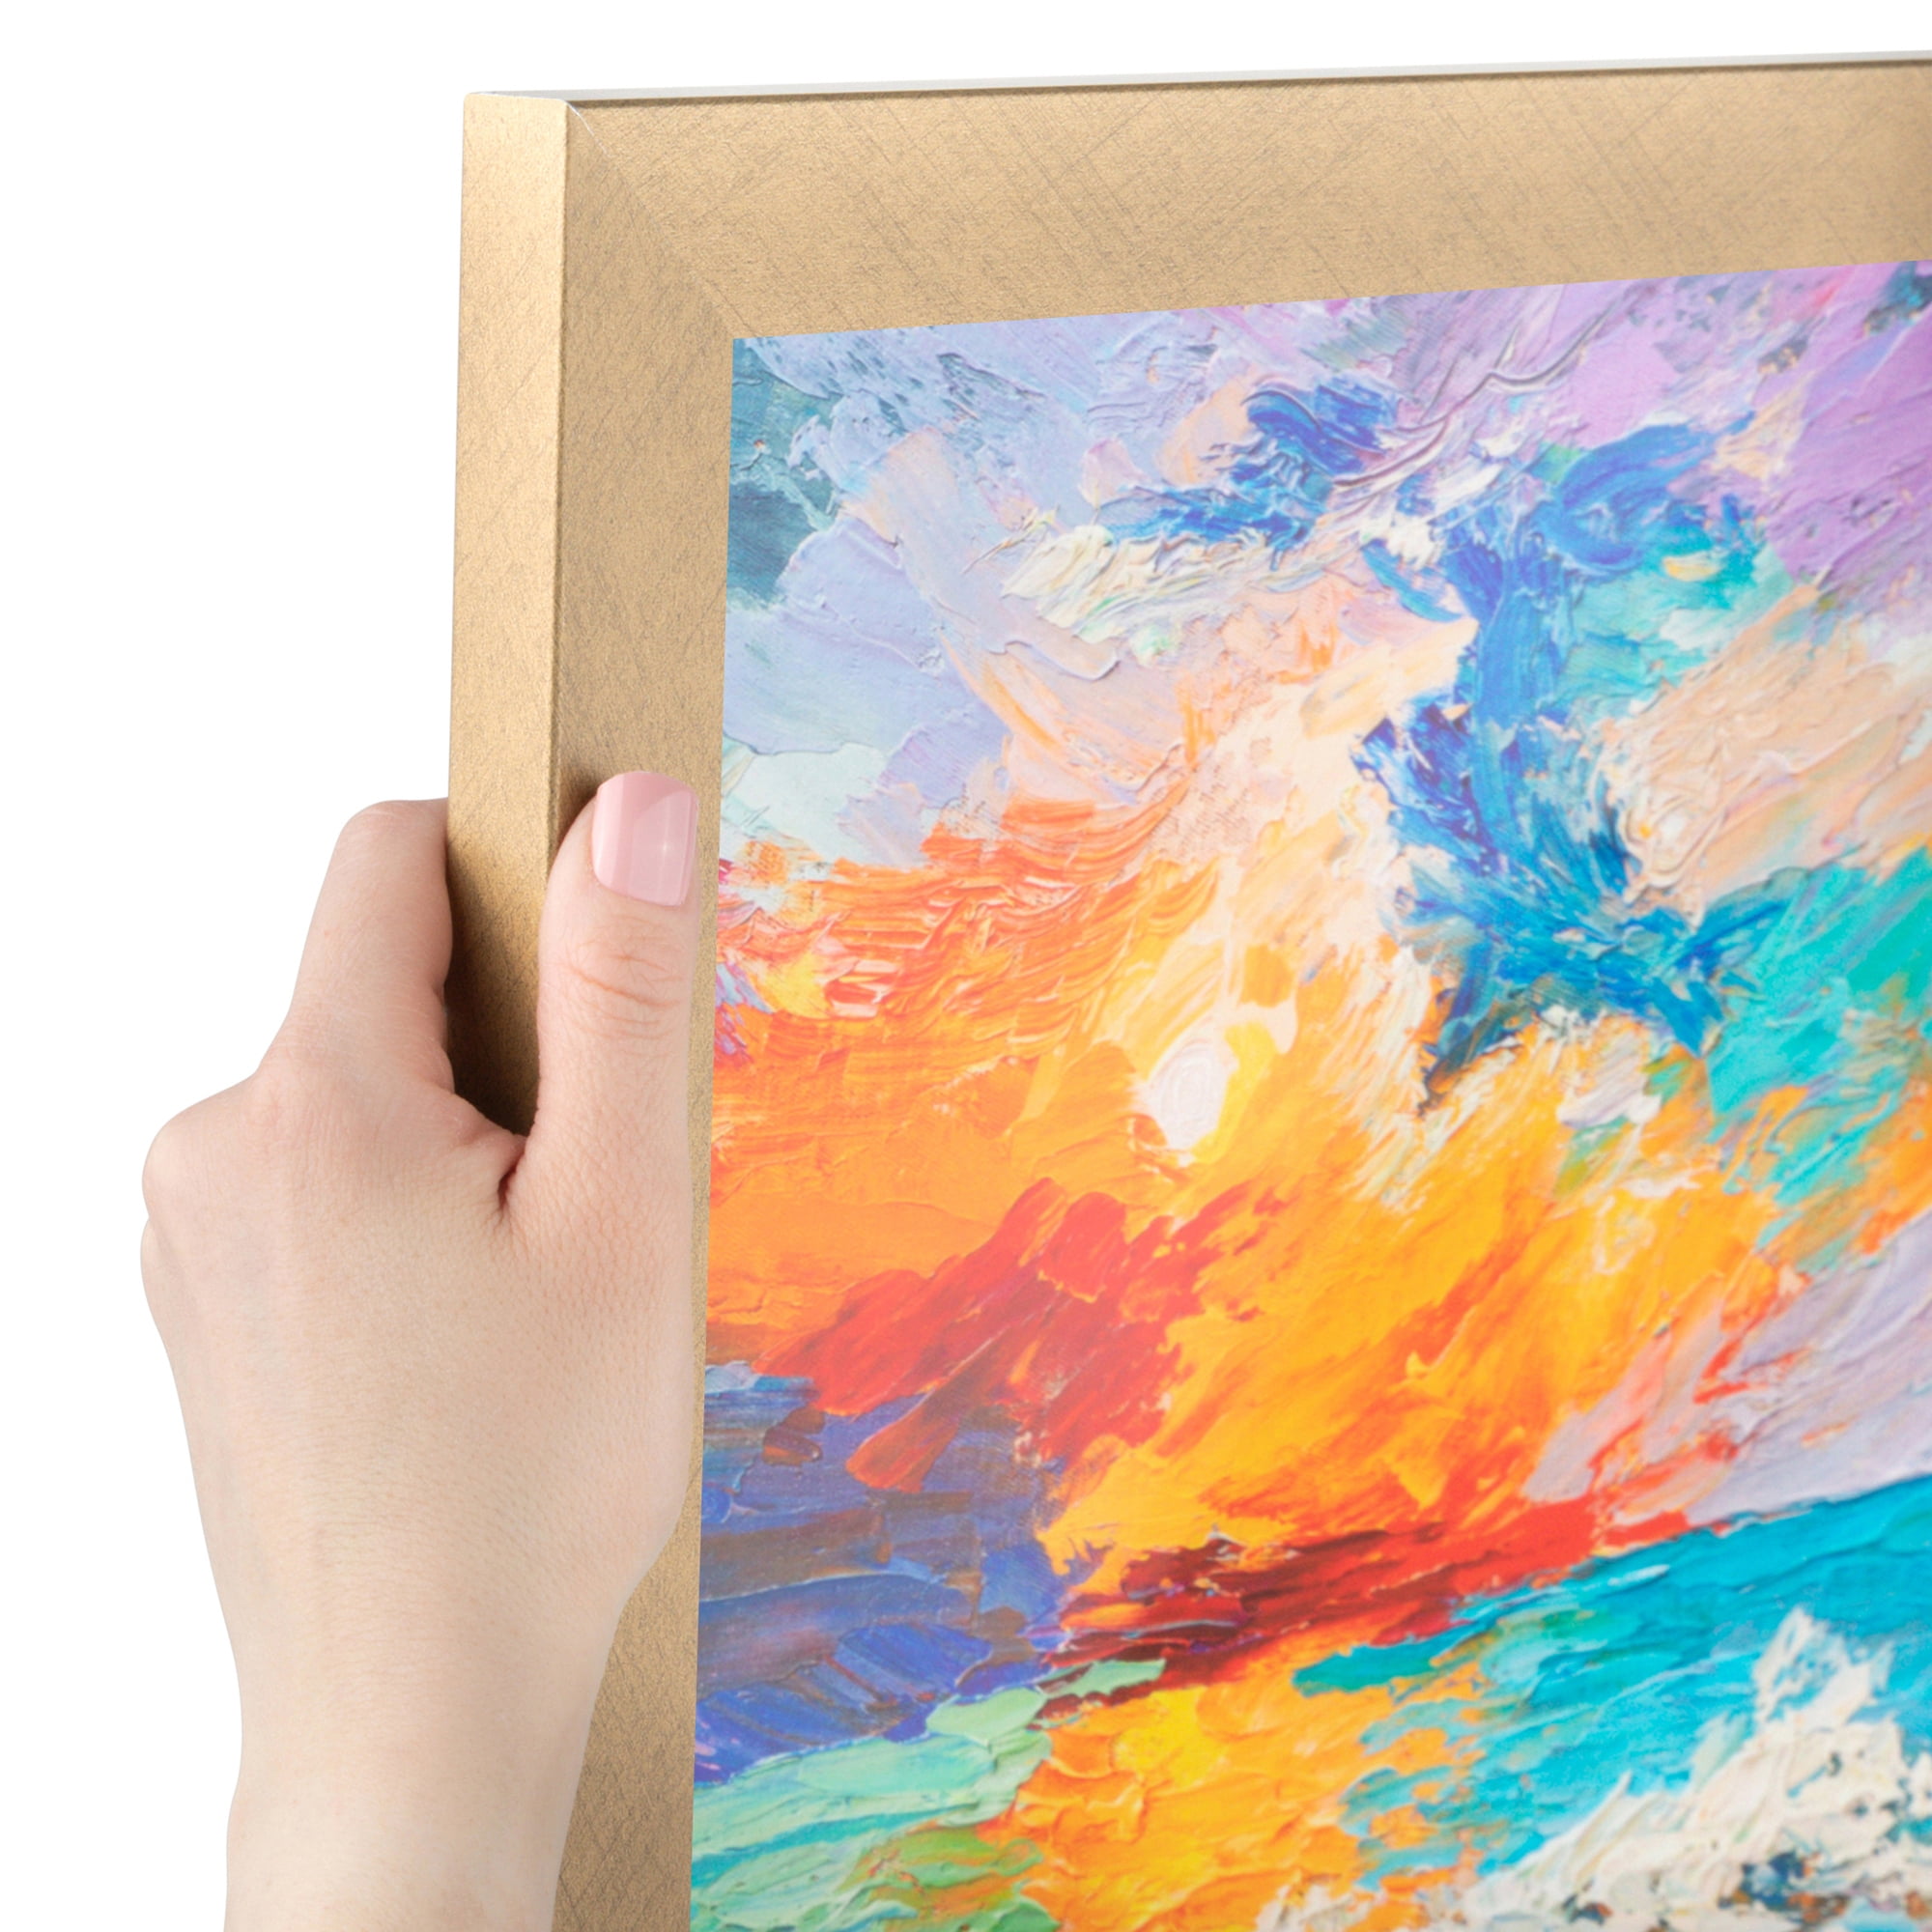 Premium AI Image  Enhance Your Artwork with a Stunning 12x16 Canvas Frame